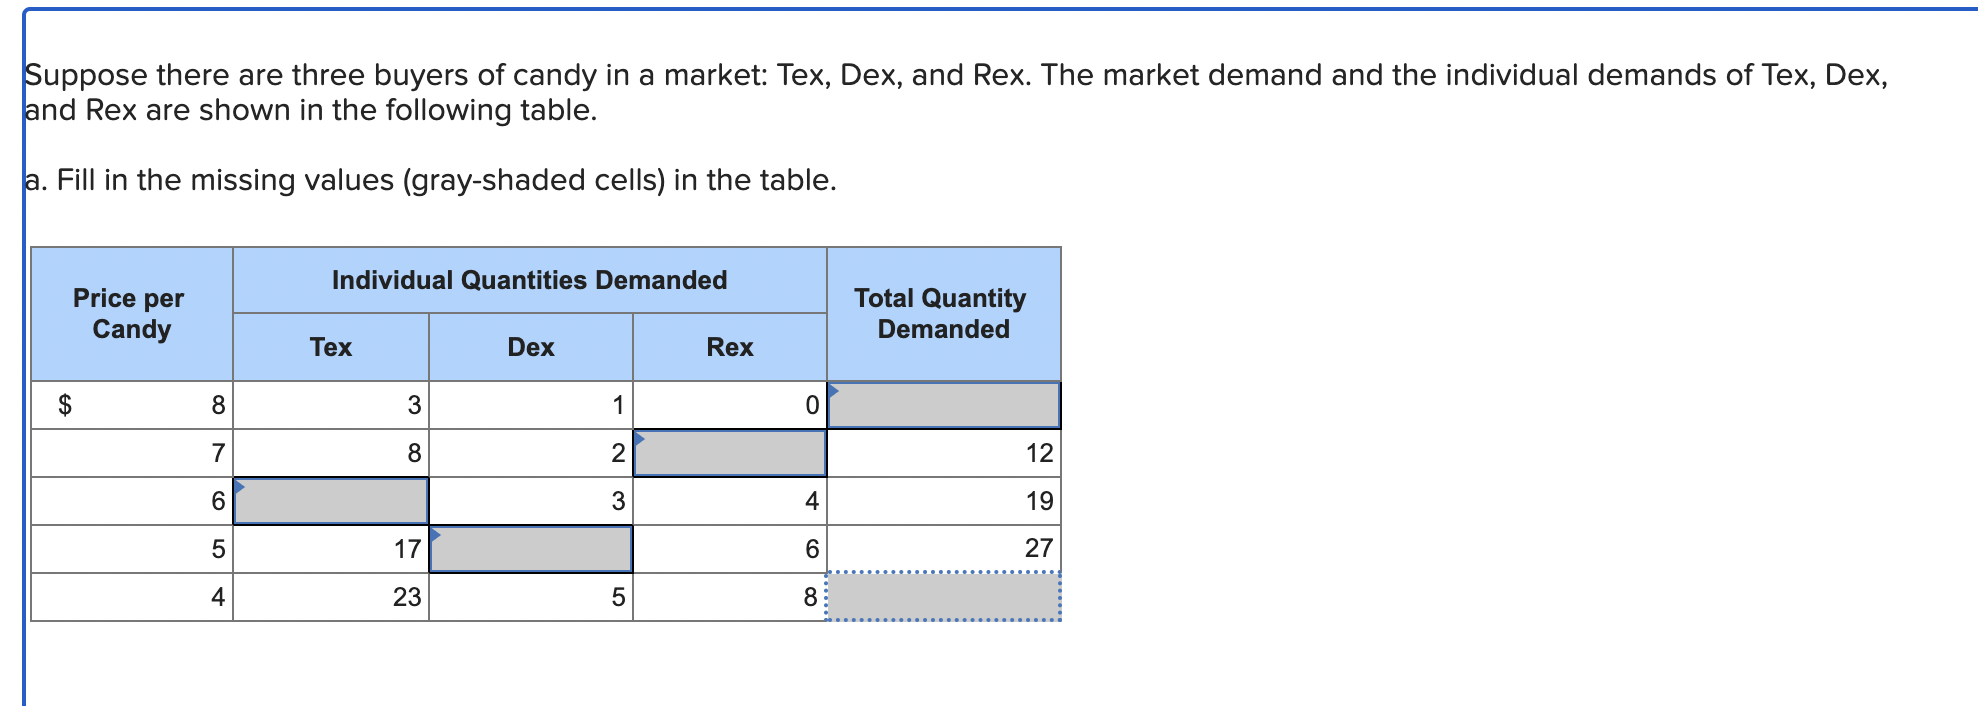 Suppose there are three buyers of candy in a market: Tex, Dex, and Rex. The market demand and the individual demands of Tex, 